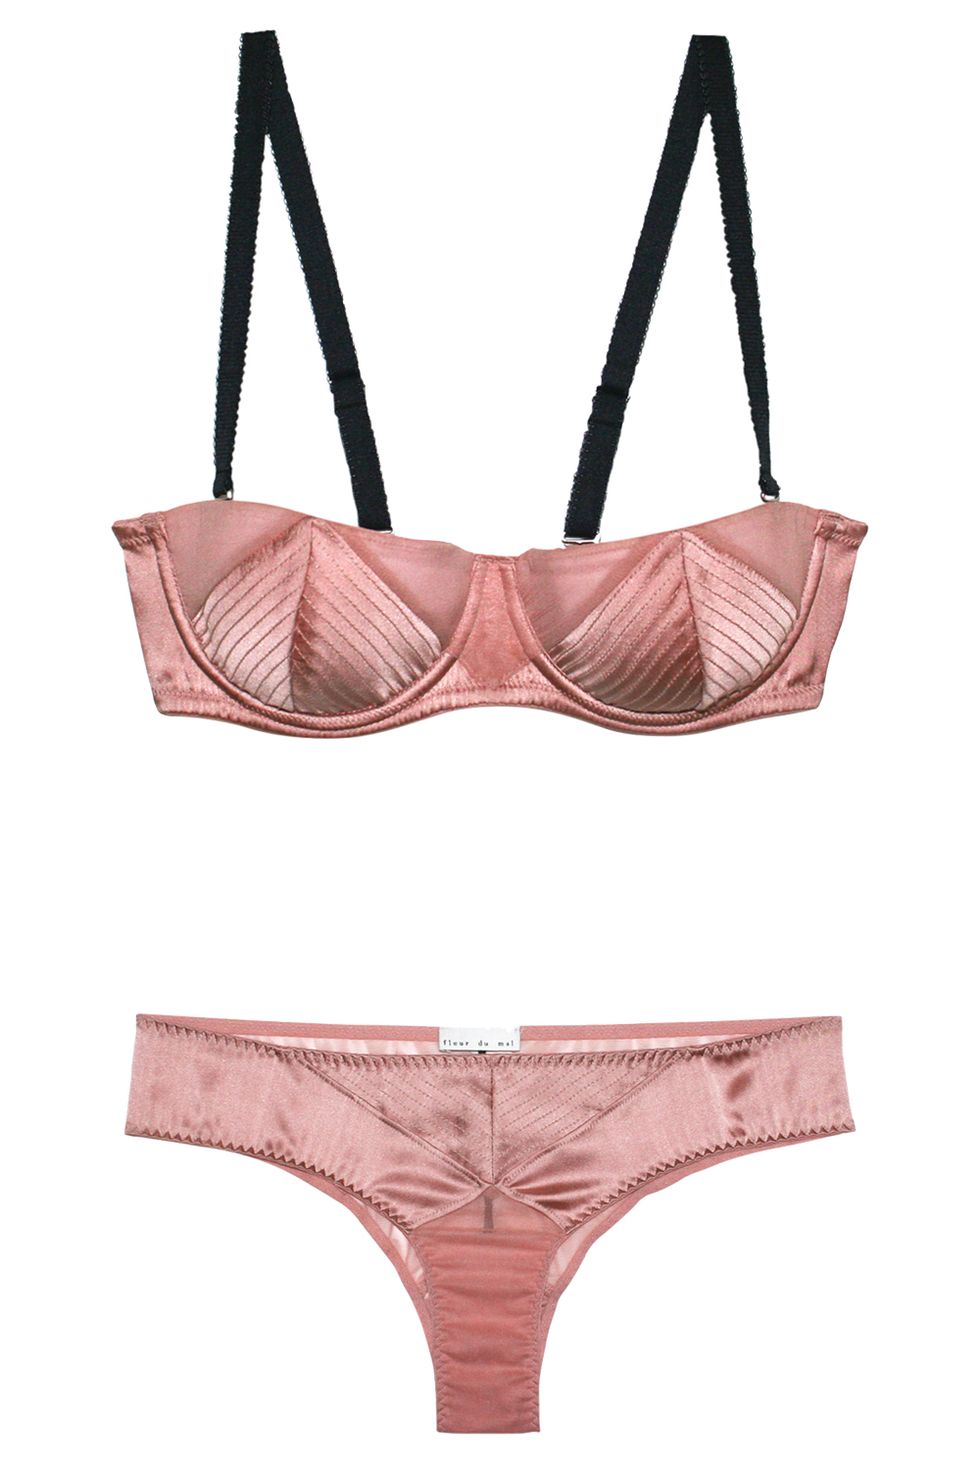 <p>So your outfit is totally chic underneath, too. <em>Fleur Du Mal Satin and Chiffon Convertible Underwire Bra, $128, <a href="https://shop.harpersbazaar.com/Designers/F/Fleur-Du-Mal/Satin-and-Chiffon-Convertible-Underwire-Bra-5847.html" target="_blank"><strong>shopBAZAAR.com</strong></a>; Fleur Du Mal Satin Hipster, $45, <a href="https://shop.harpersbazaar.com/Designers/F/Fleur-Du-Mal/Satin-Hipster-5849.html" target="_blank"><strong>shopBAZAAR.com</strong></a>.</em></p>